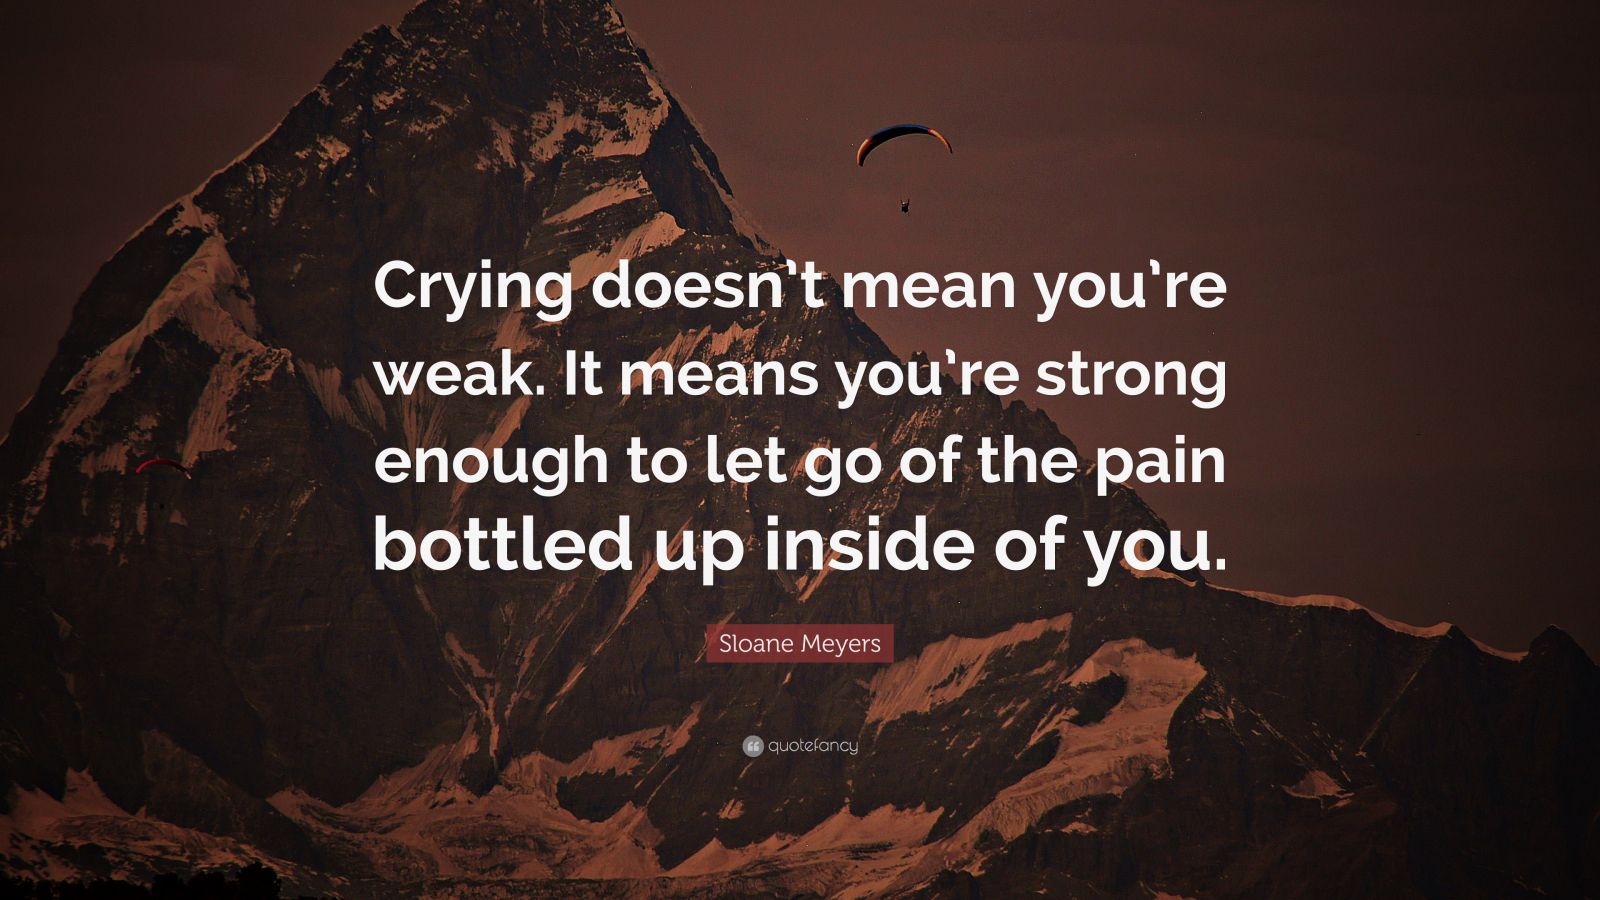 Sloane Meyers Quote: “Crying doesn't mean you're weak. It means ...